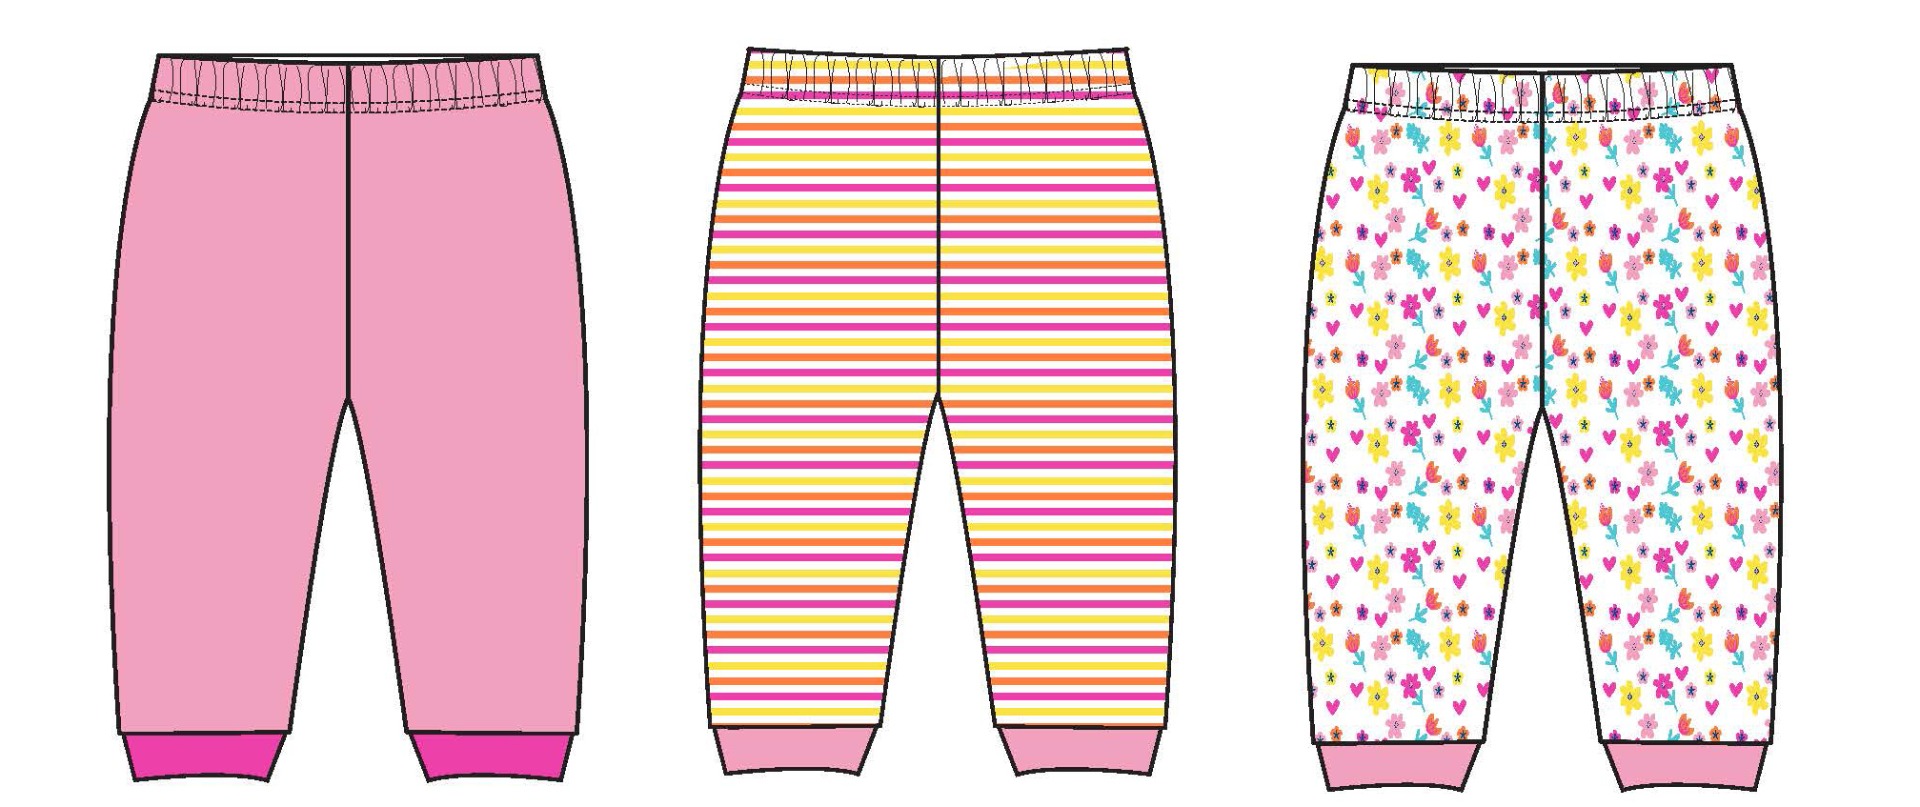 ''Baby Girl's Printed Pull-On PANTS w/ Floral, Striped, & Solid Print -Sizes 12M-24M - 3-Pack''